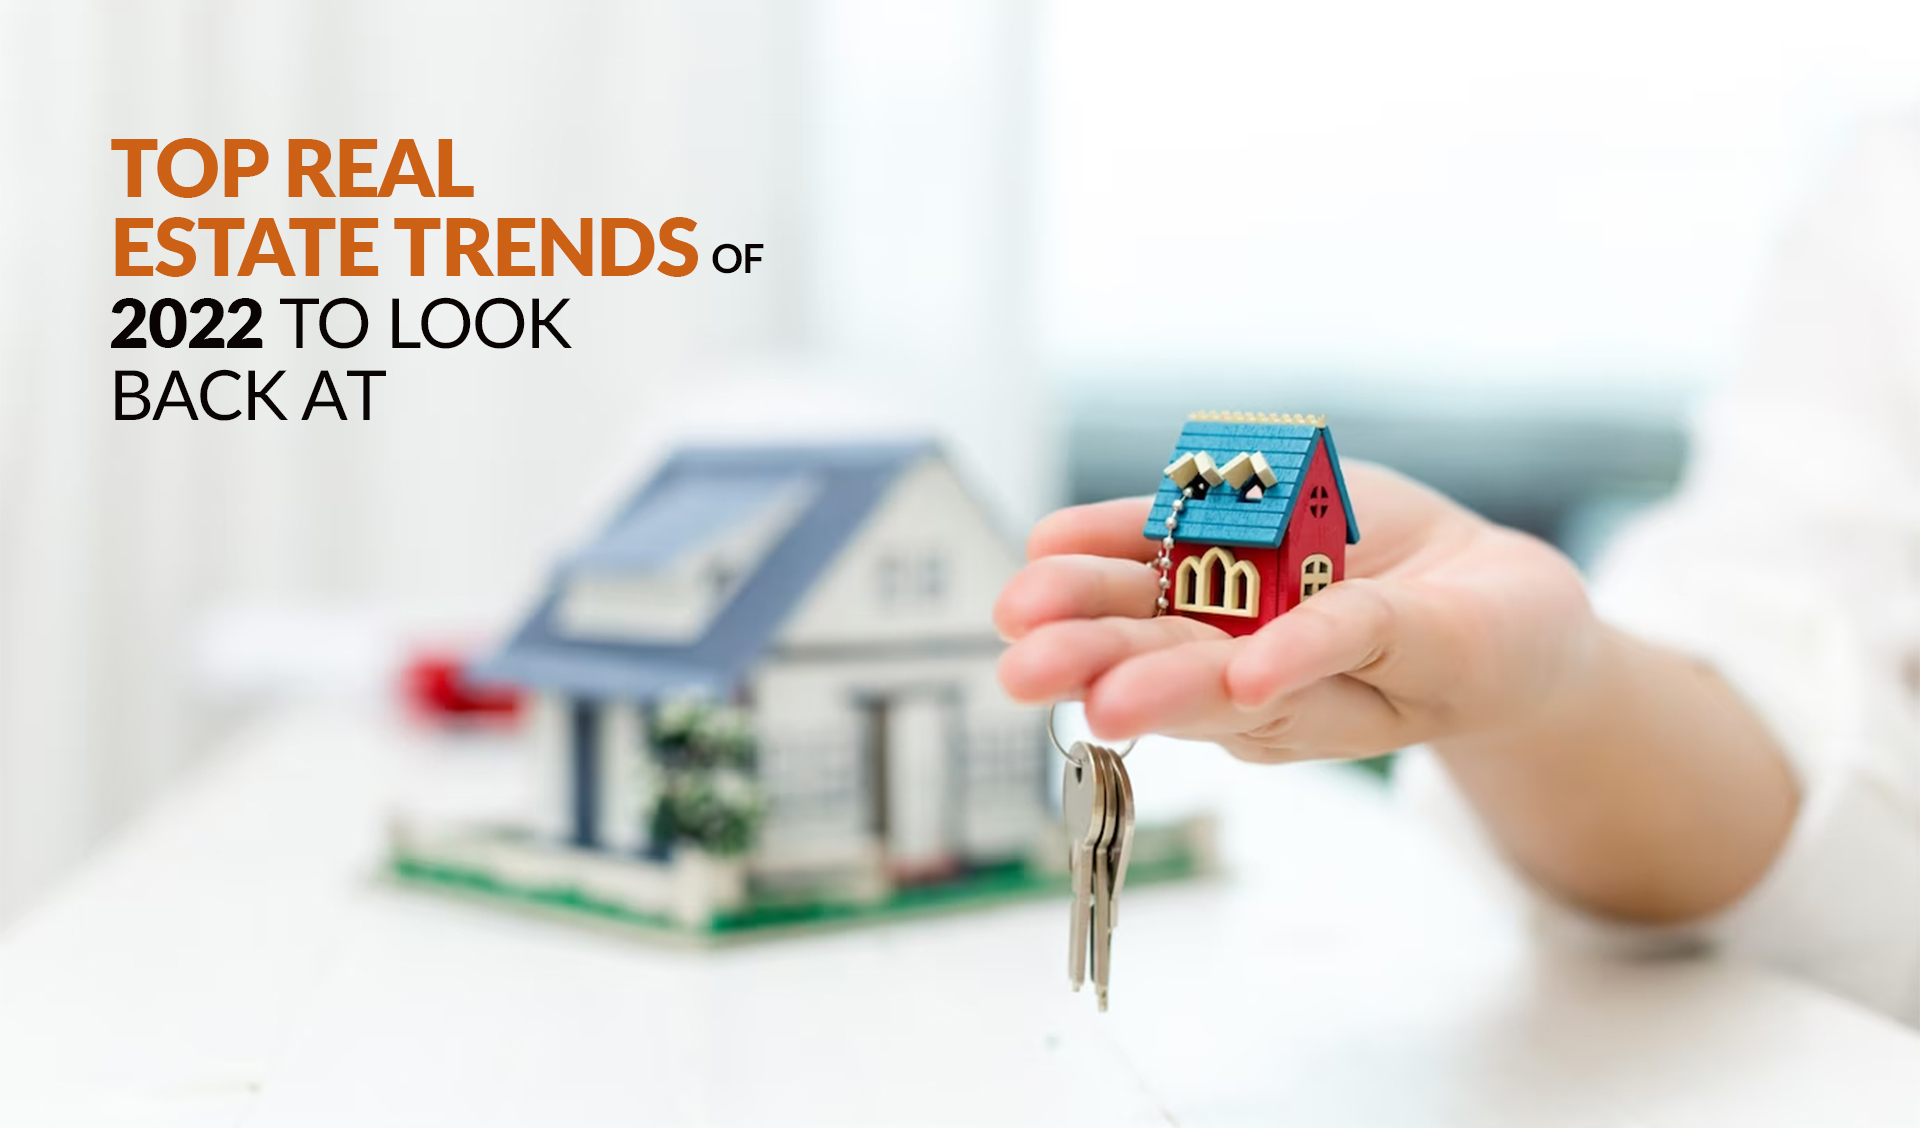 Top Real Estate Trends of 2022 to Look Back At by Puneet Urban Spaces